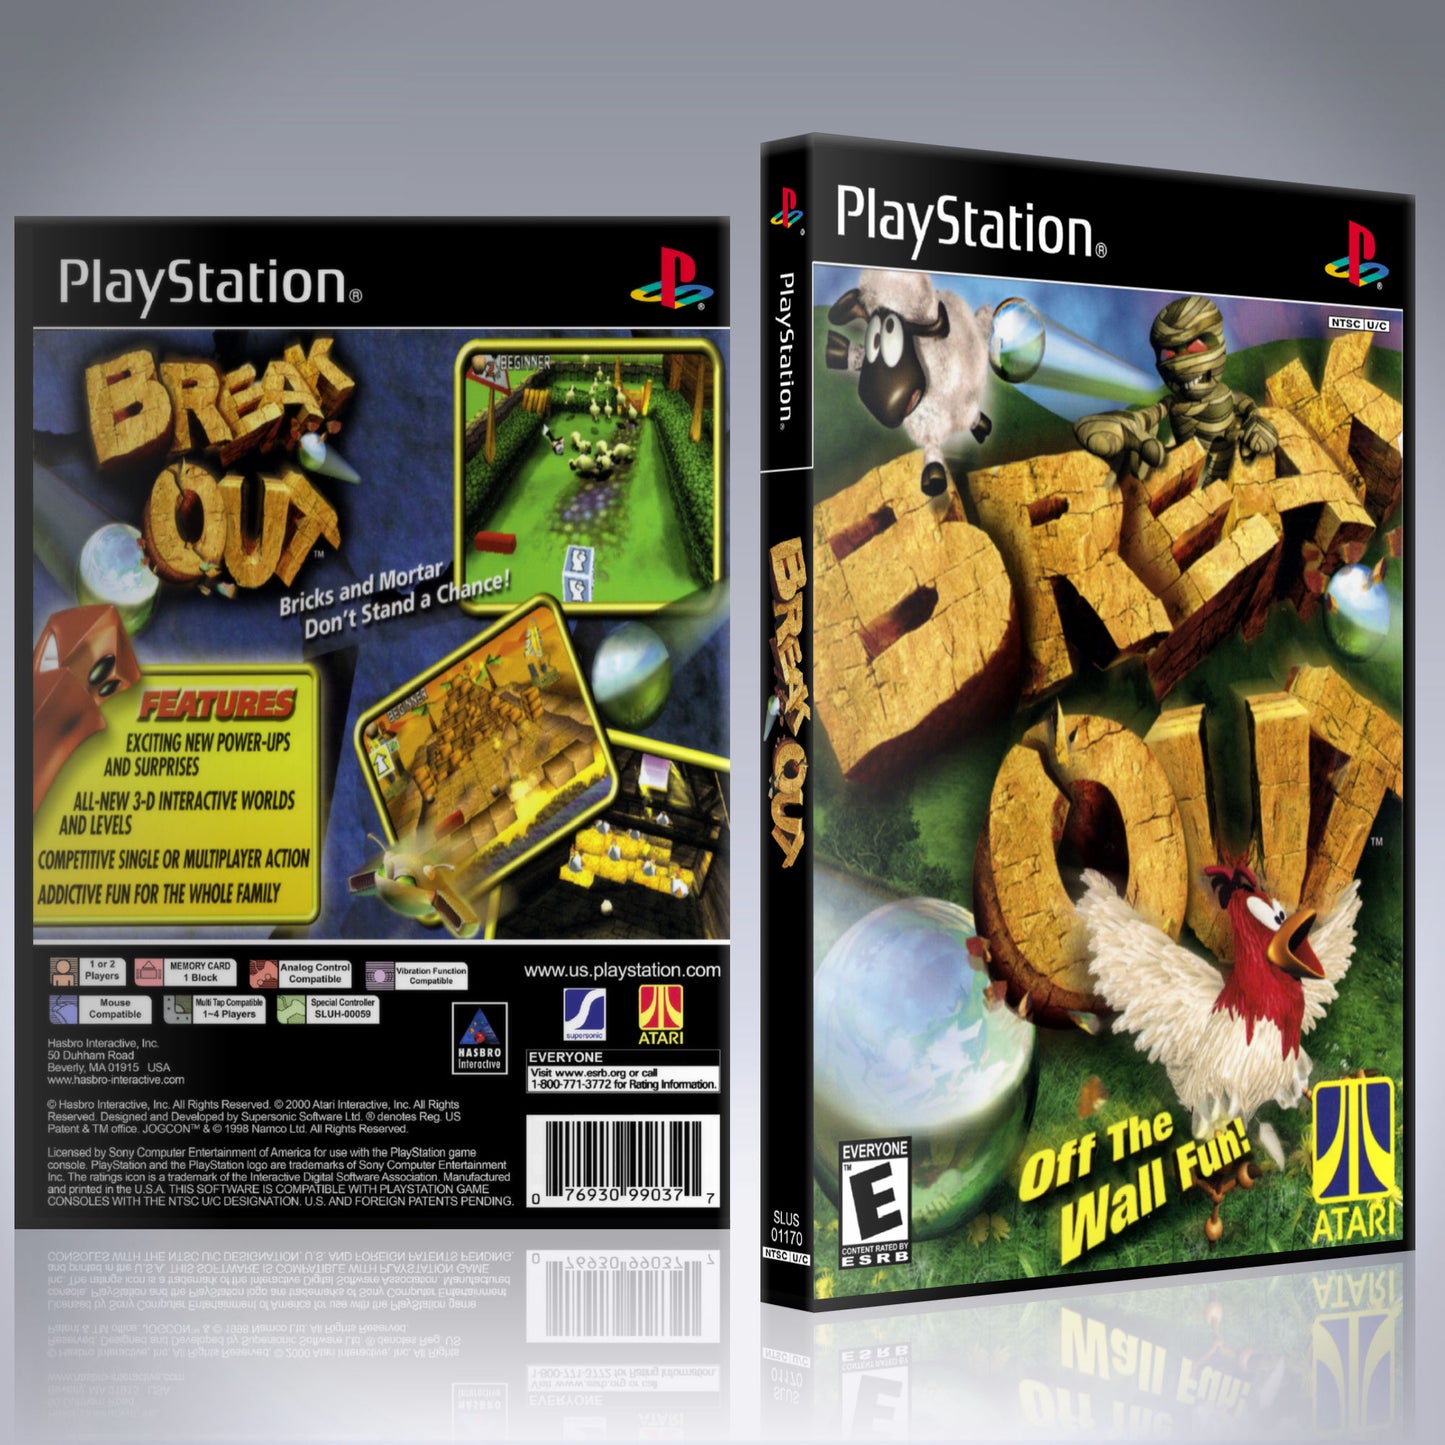 PS1 Case - NO GAME - Breakout